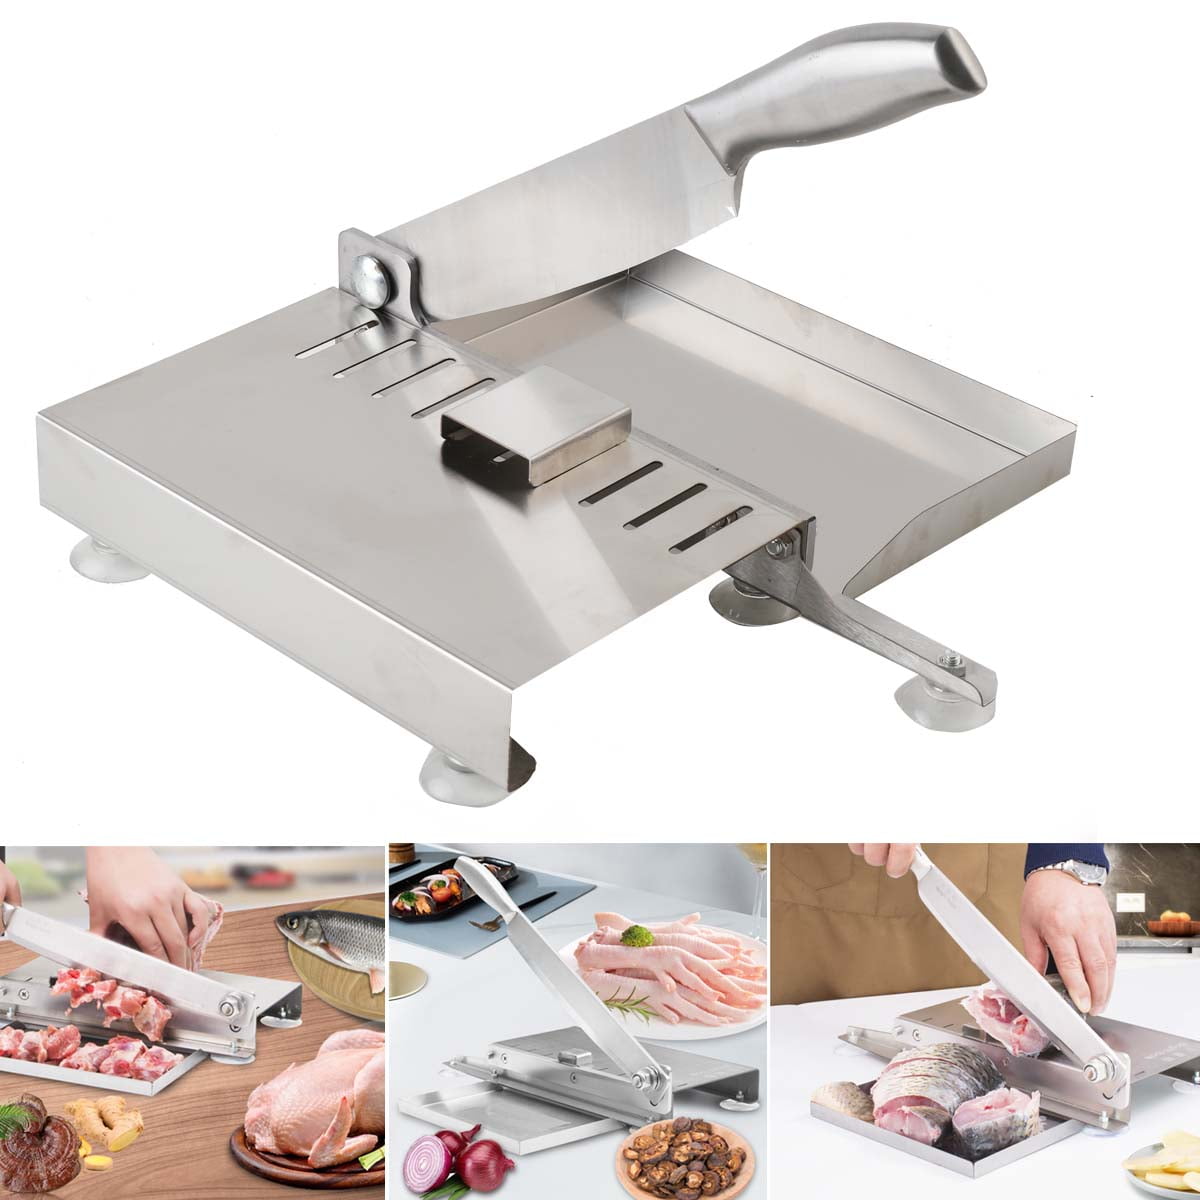 CGOLDENWALL 2 Blades Manual Ribs Meat Chopper Slicer Stainless Steel Hard Bone Cutter Beef Mutton Household Vegetable Food Slicer Slicing Machine